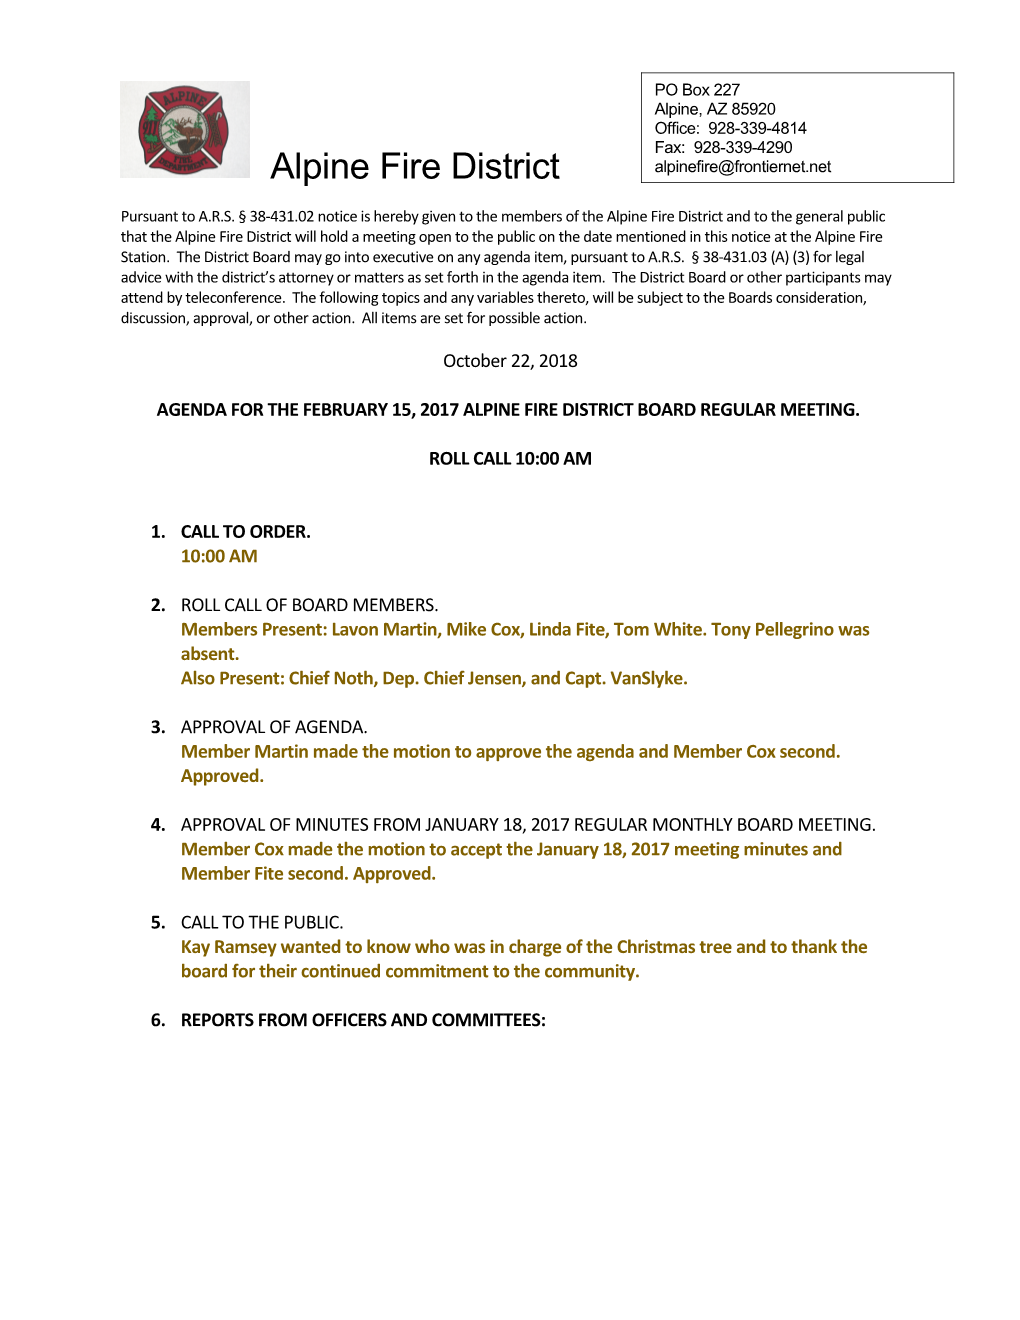 Agenda for the February 15, 2017 Alpine Fire District Board Regular Meeting